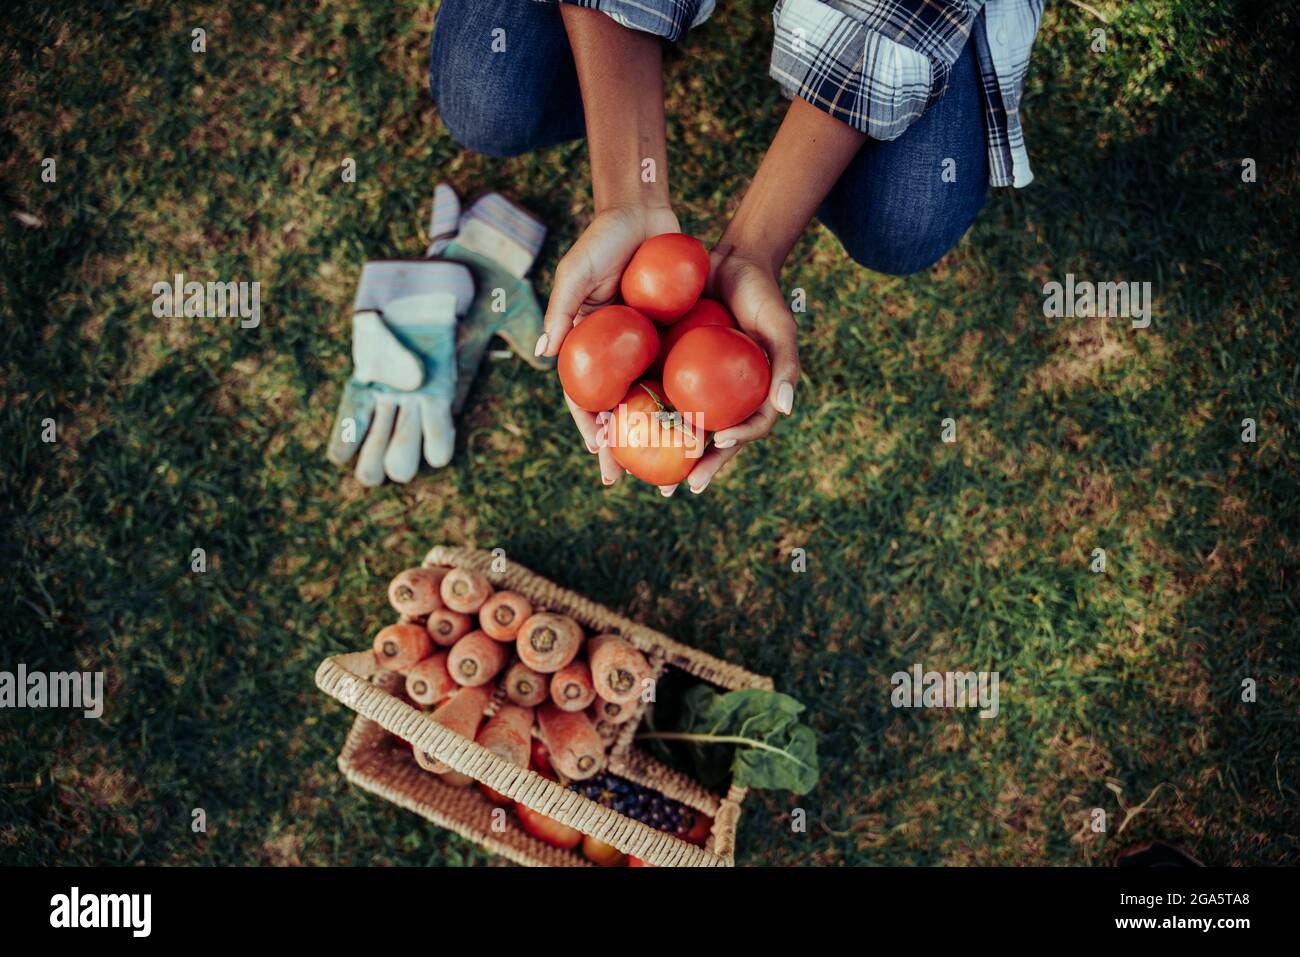 Mixed race female holding red cherry tomatoes in cupped hands standing over fresh vegetables in basket  Stock Photo